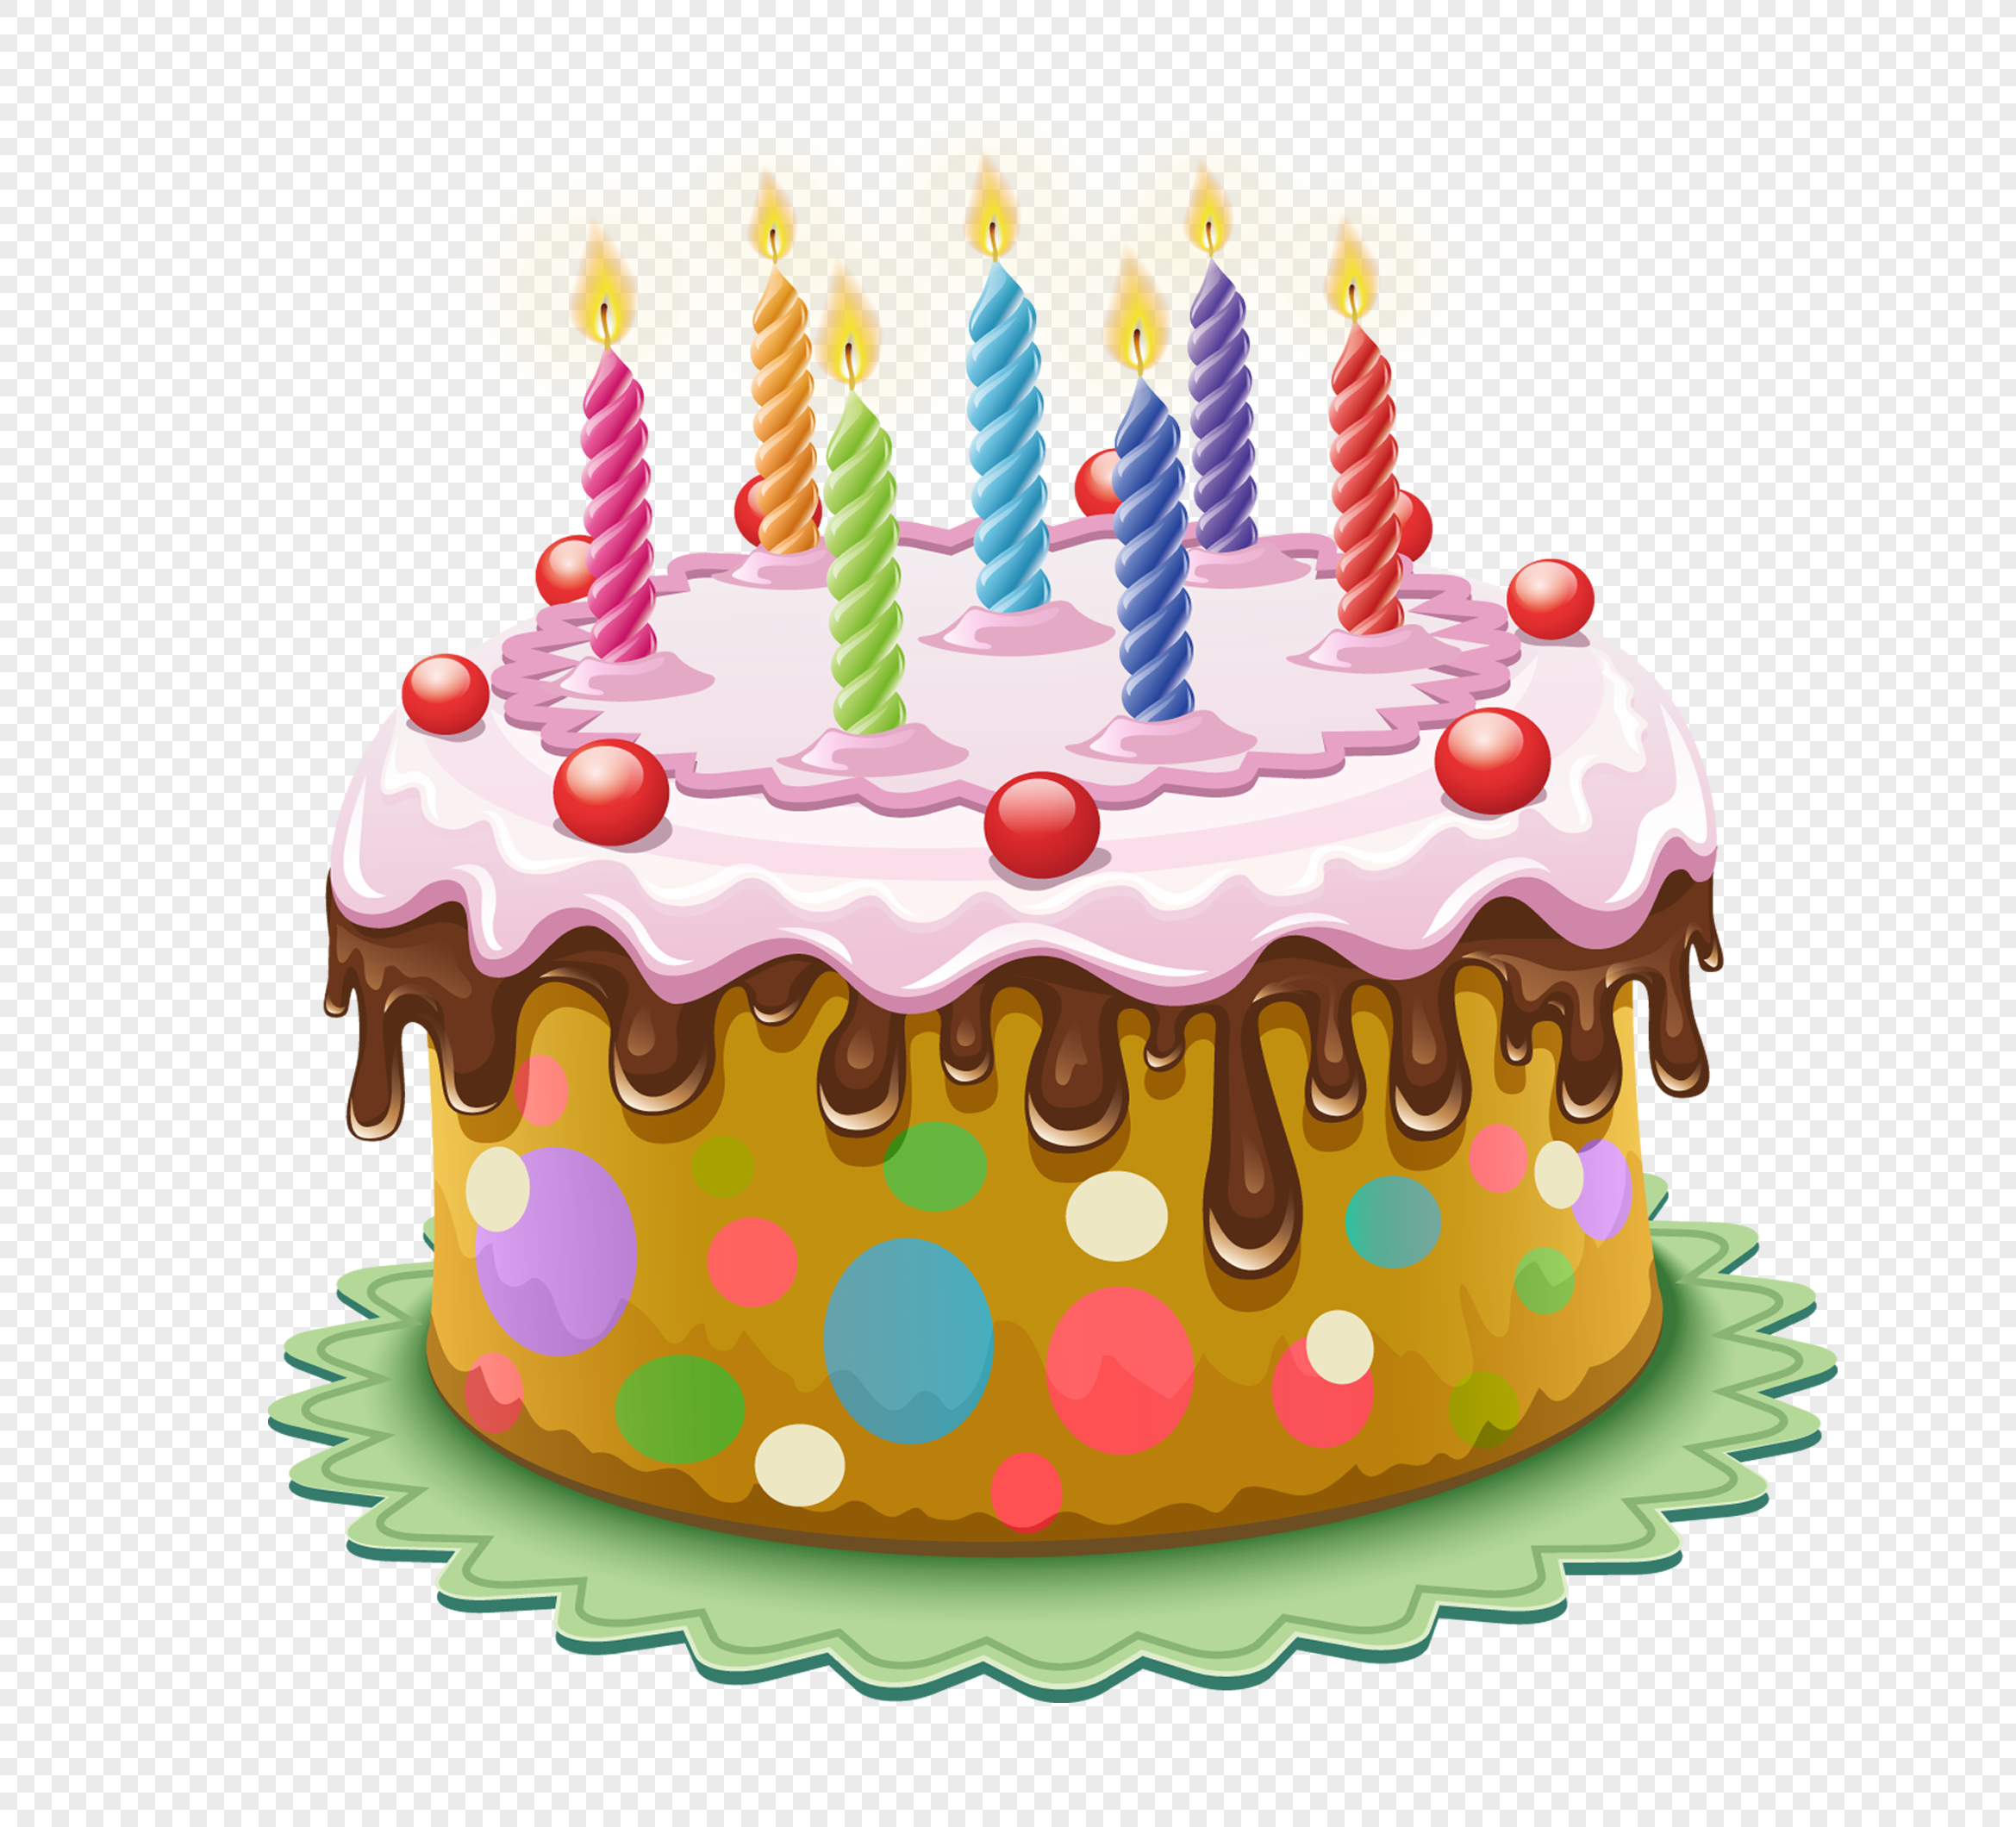 Top 95+ Images Cartoon Pictures Of Birthday Cake Updated